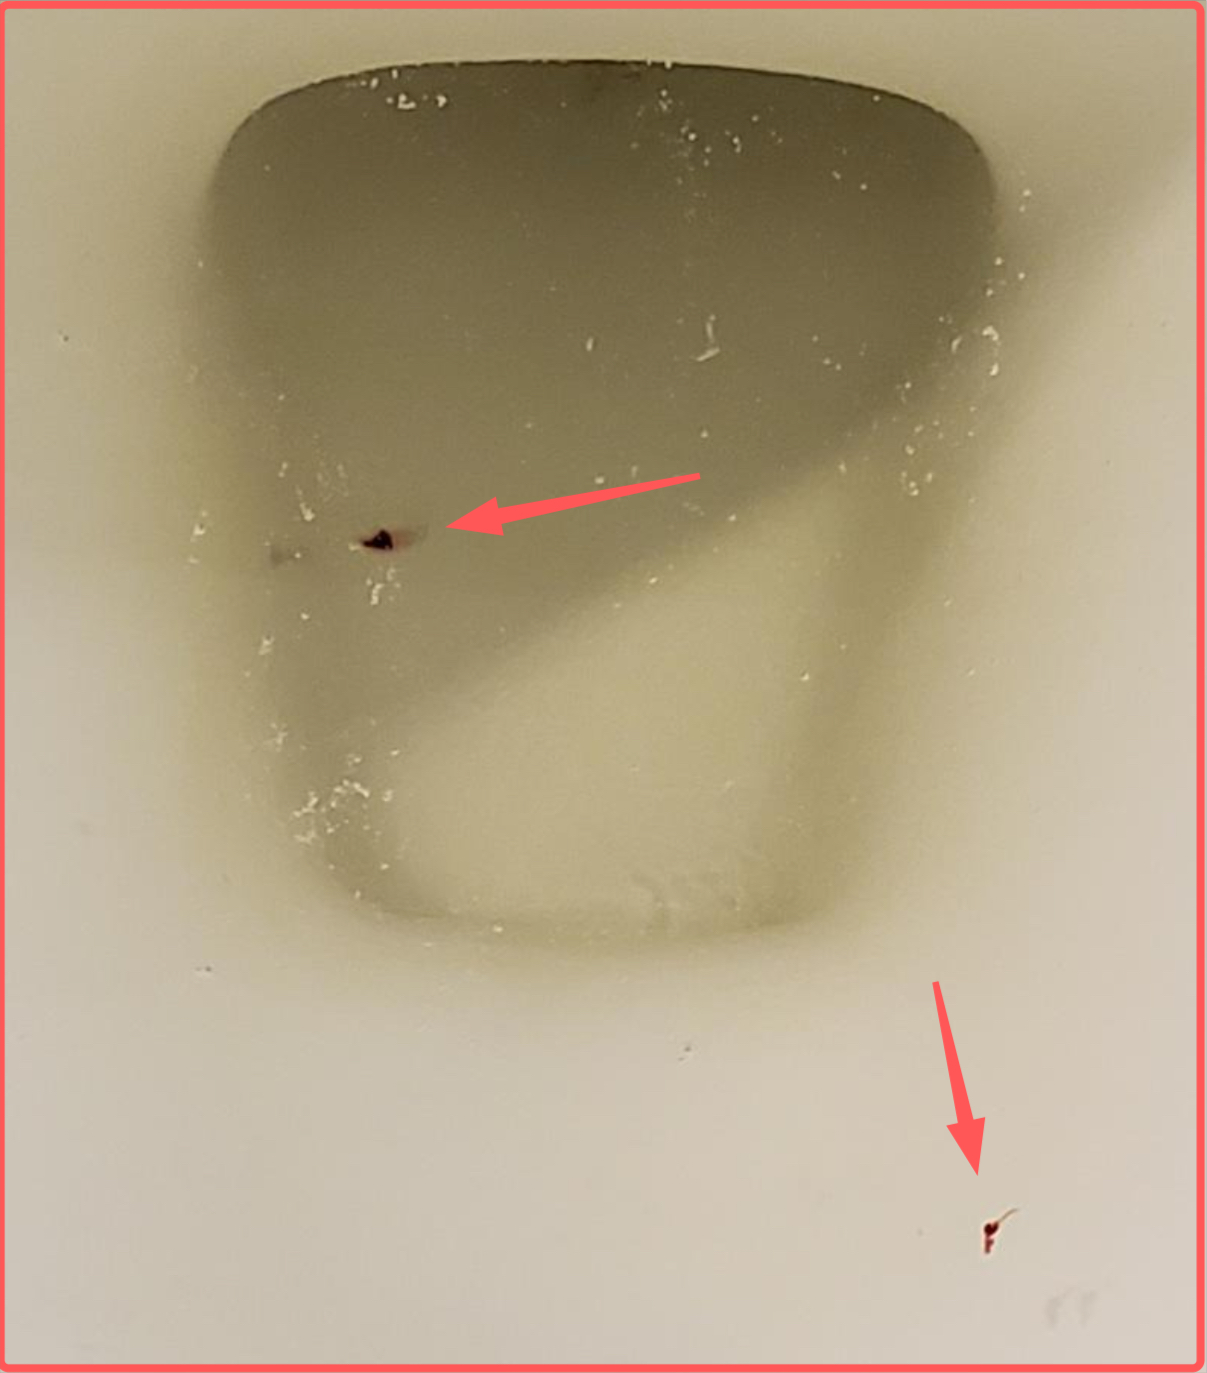 https://doctor-explains.com/wp-content/uploads/2022/11/small-tiny-blood-clot-in-urine.jpg